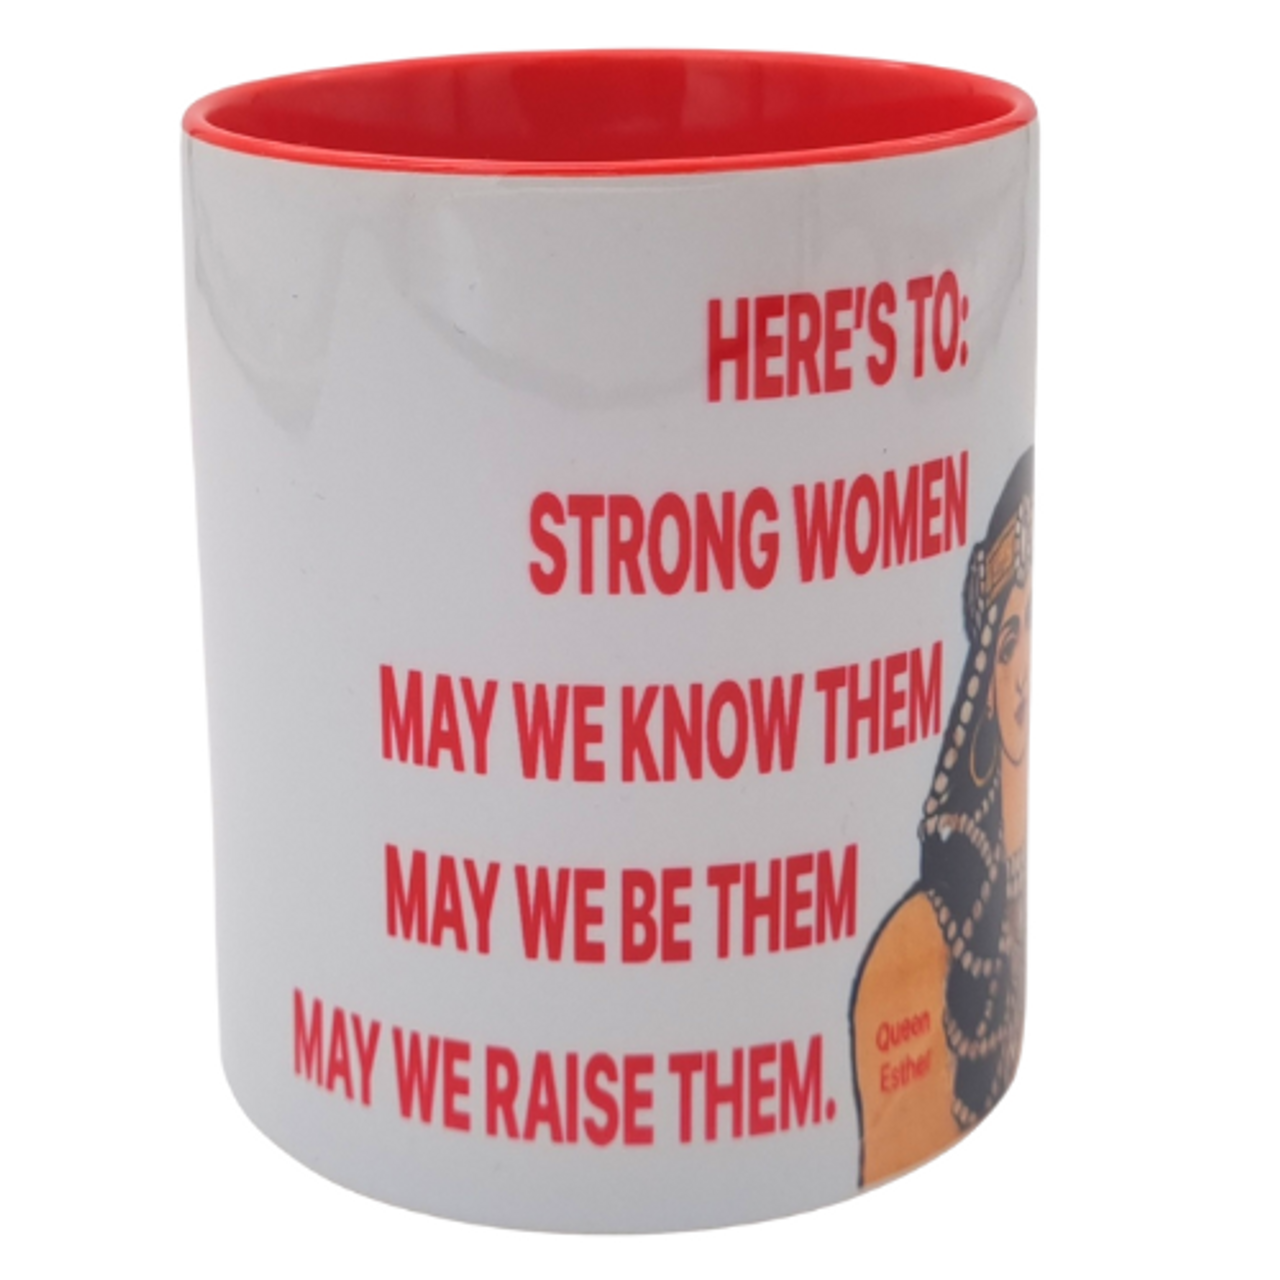 Here's to Strong Women Travel Mug by The Midwife's Market